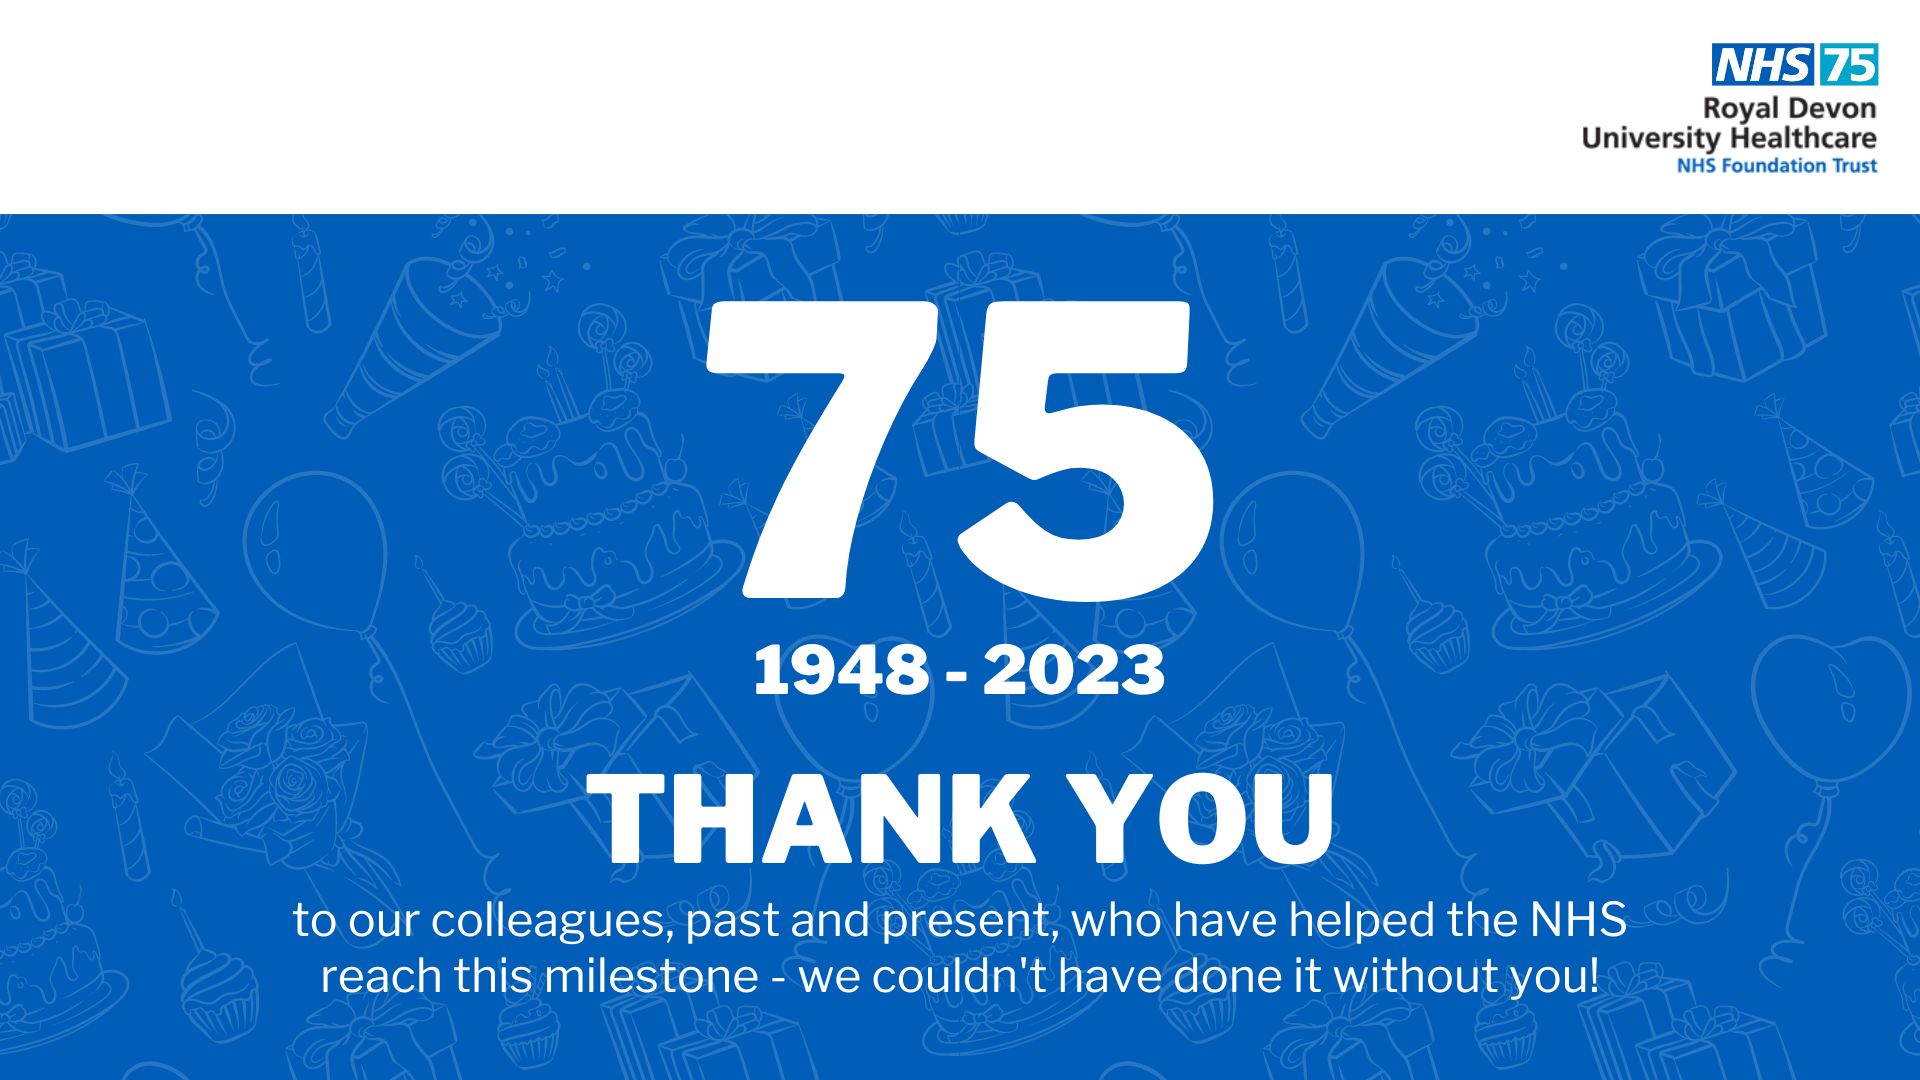 NHS 75 - 1948 - 2023  Thank you to our colleagues, past and present, who have helped the NHS reach this milestone - we couldn't have done it without you!